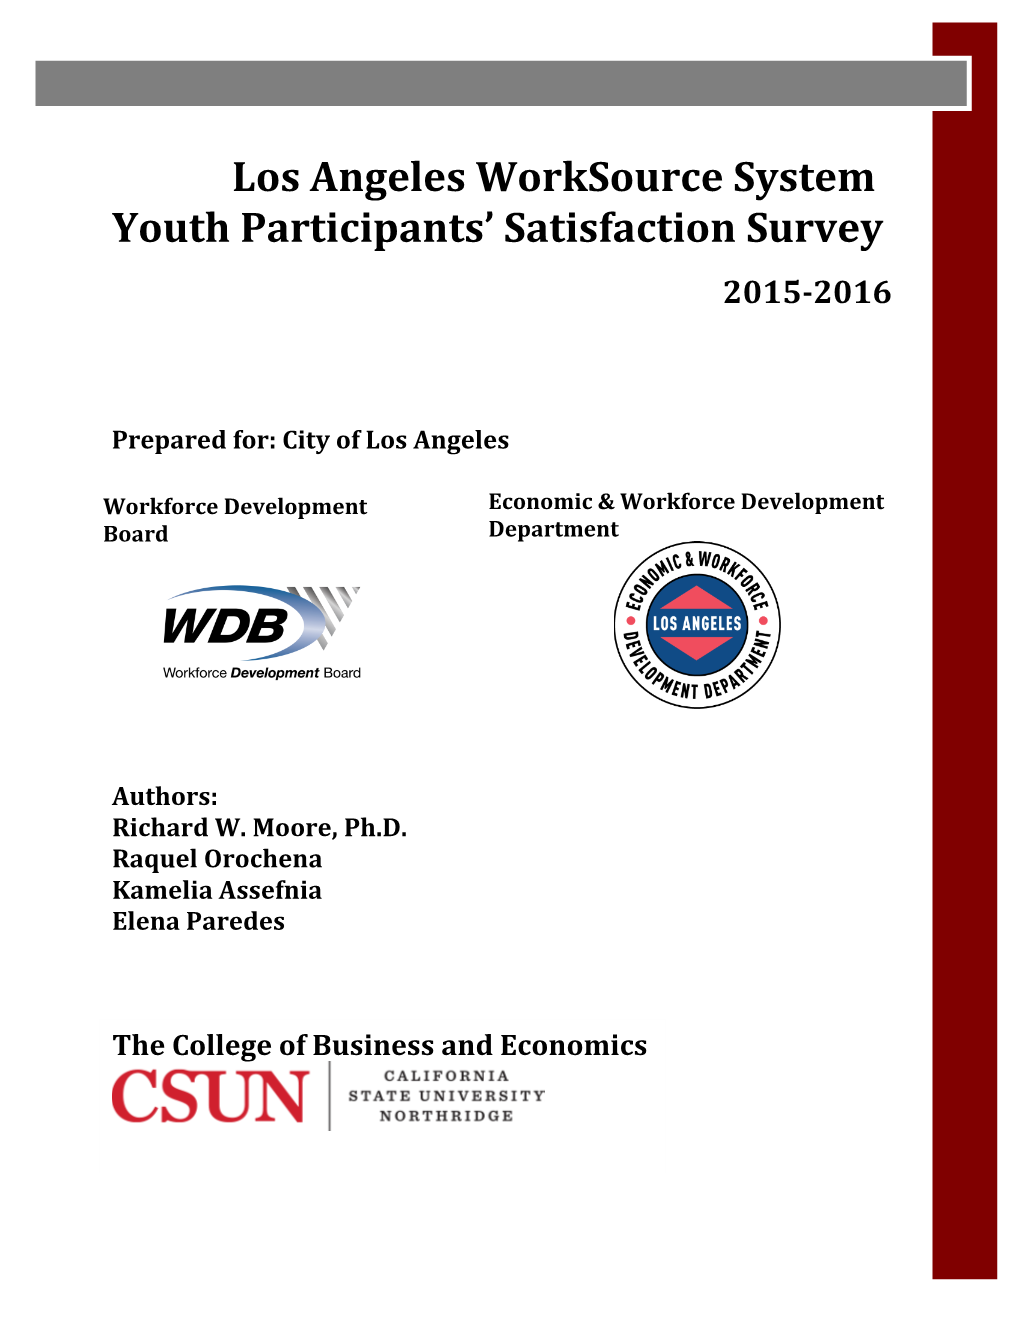 Los Angeles Worksource System Youth Participants' Satisfaction